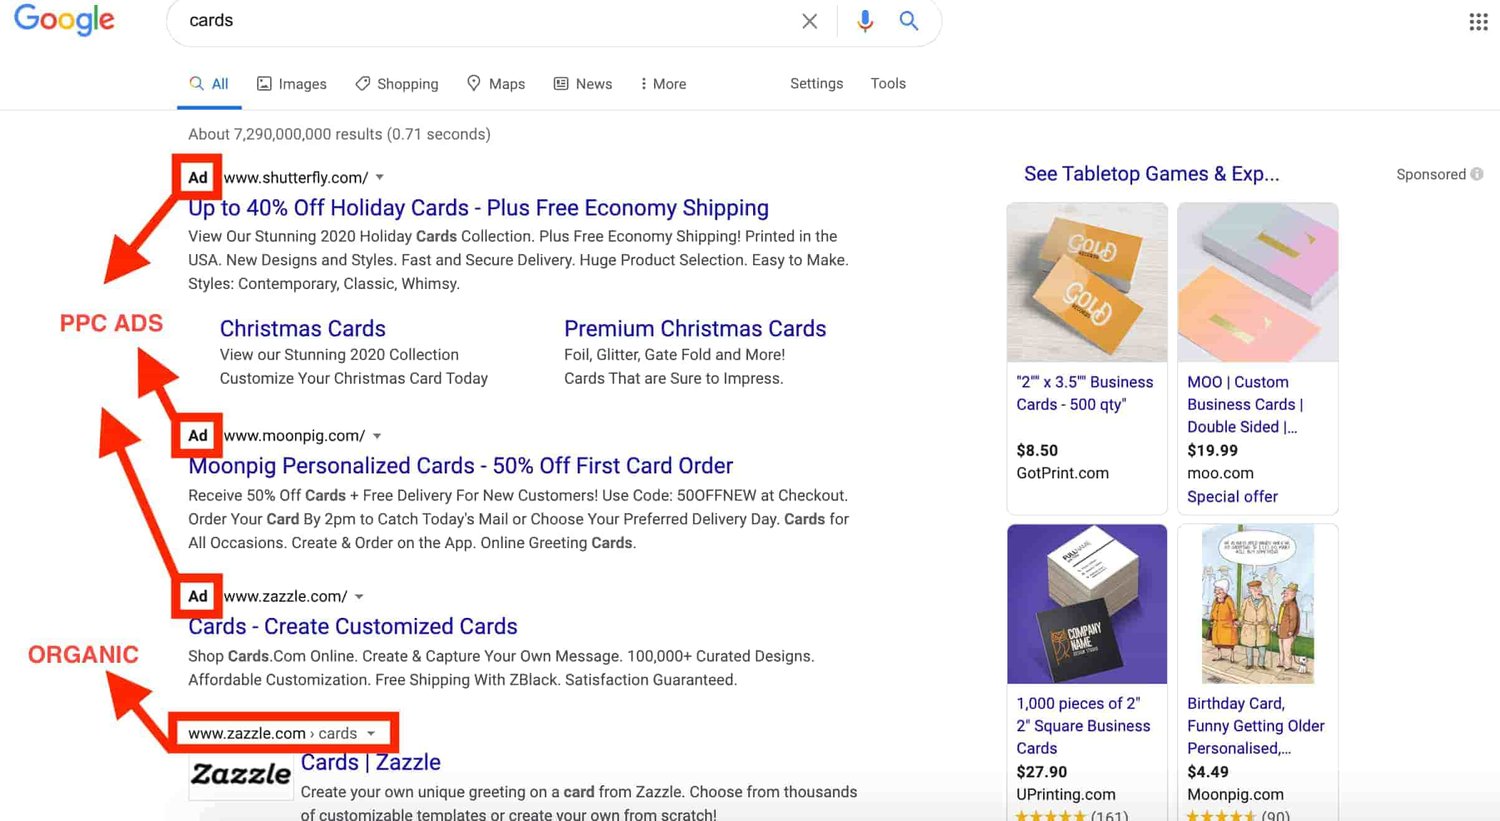 The Ultimate Guide to PPC